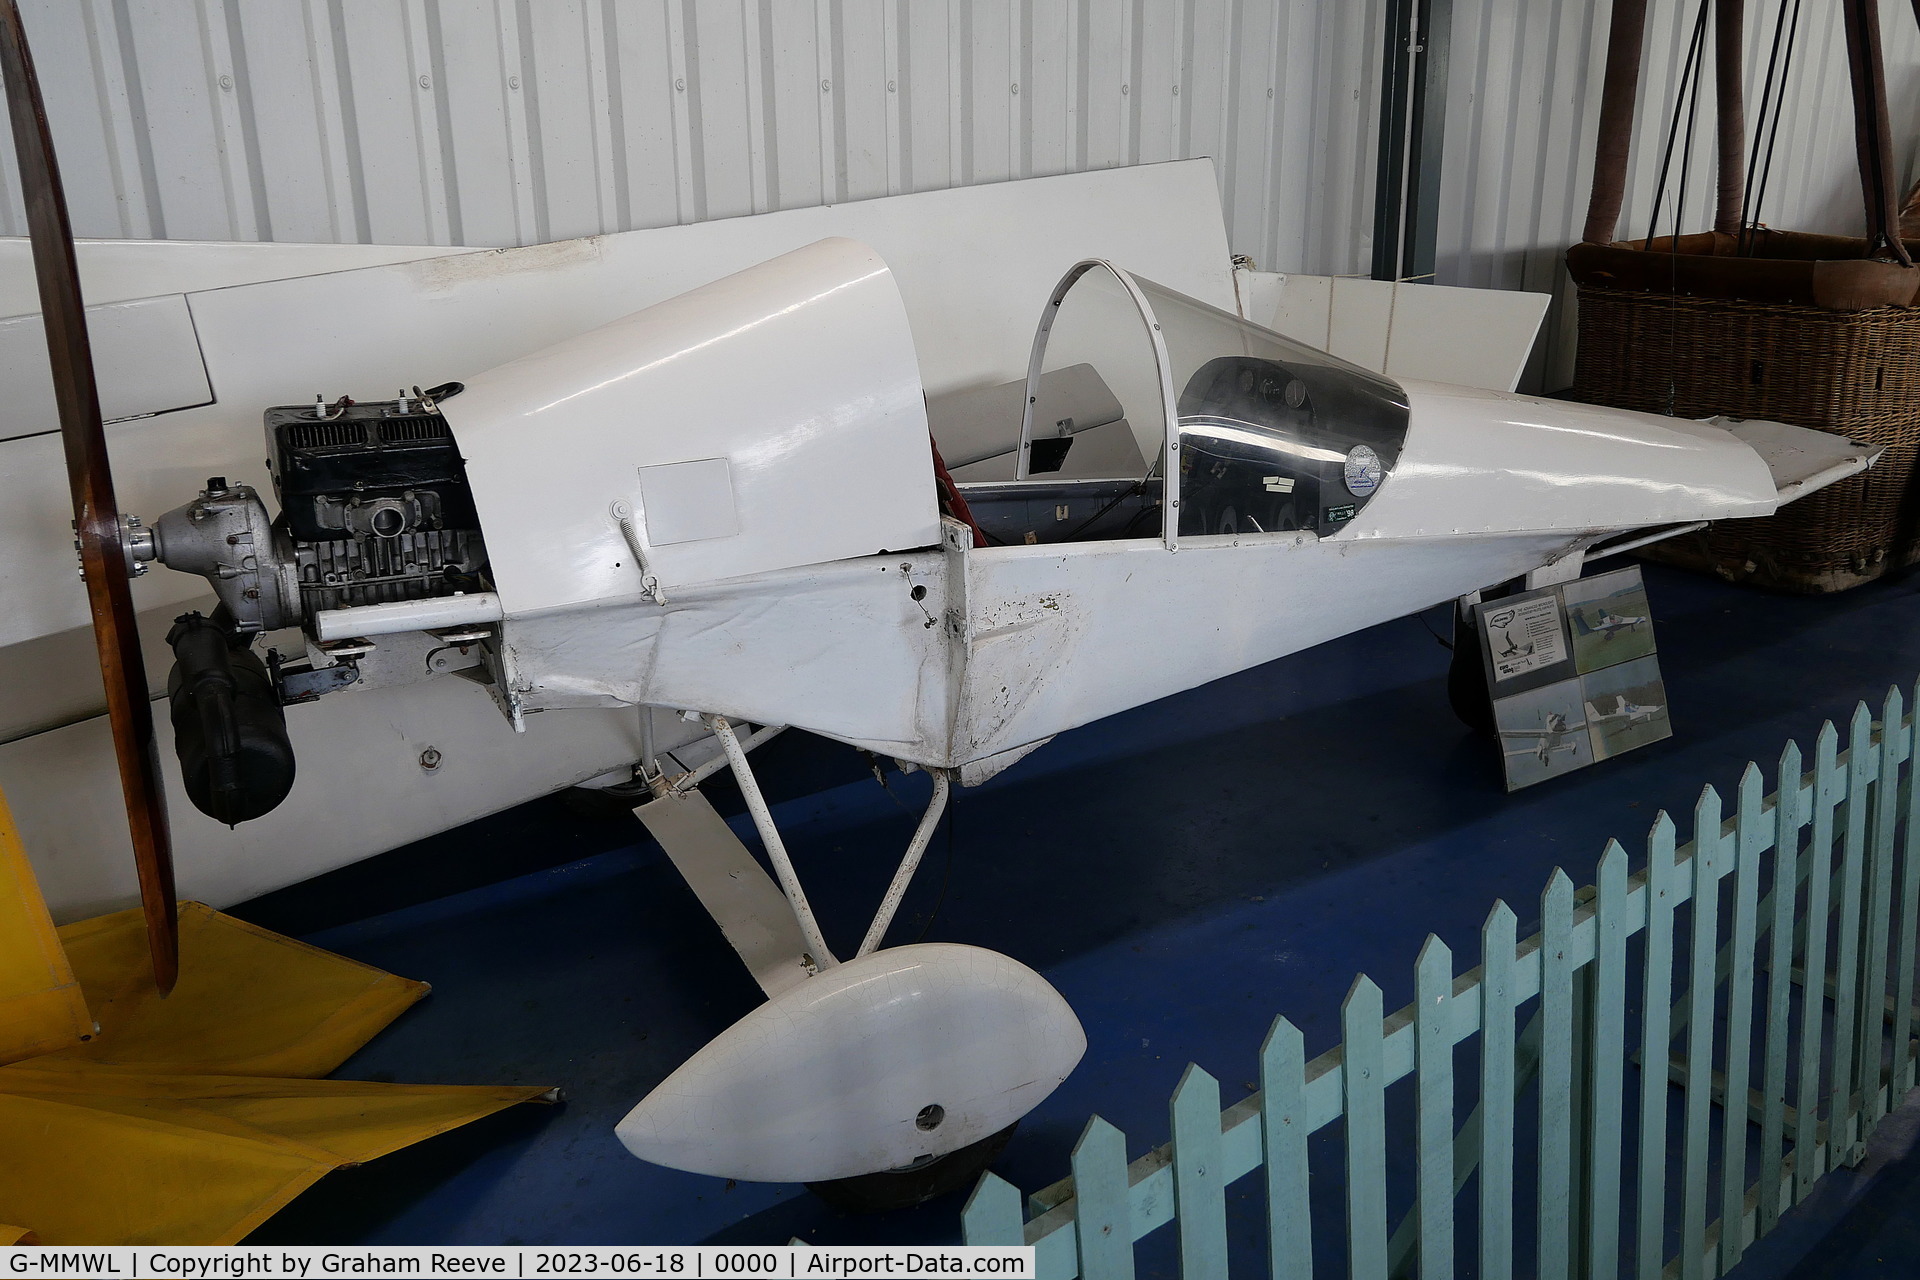 G-MMWL, 1983 Eurowing Ltd Goldwing C/N EW-91, Preserved at the Norfolk and Suffolk Aviation Museum, Flixton.